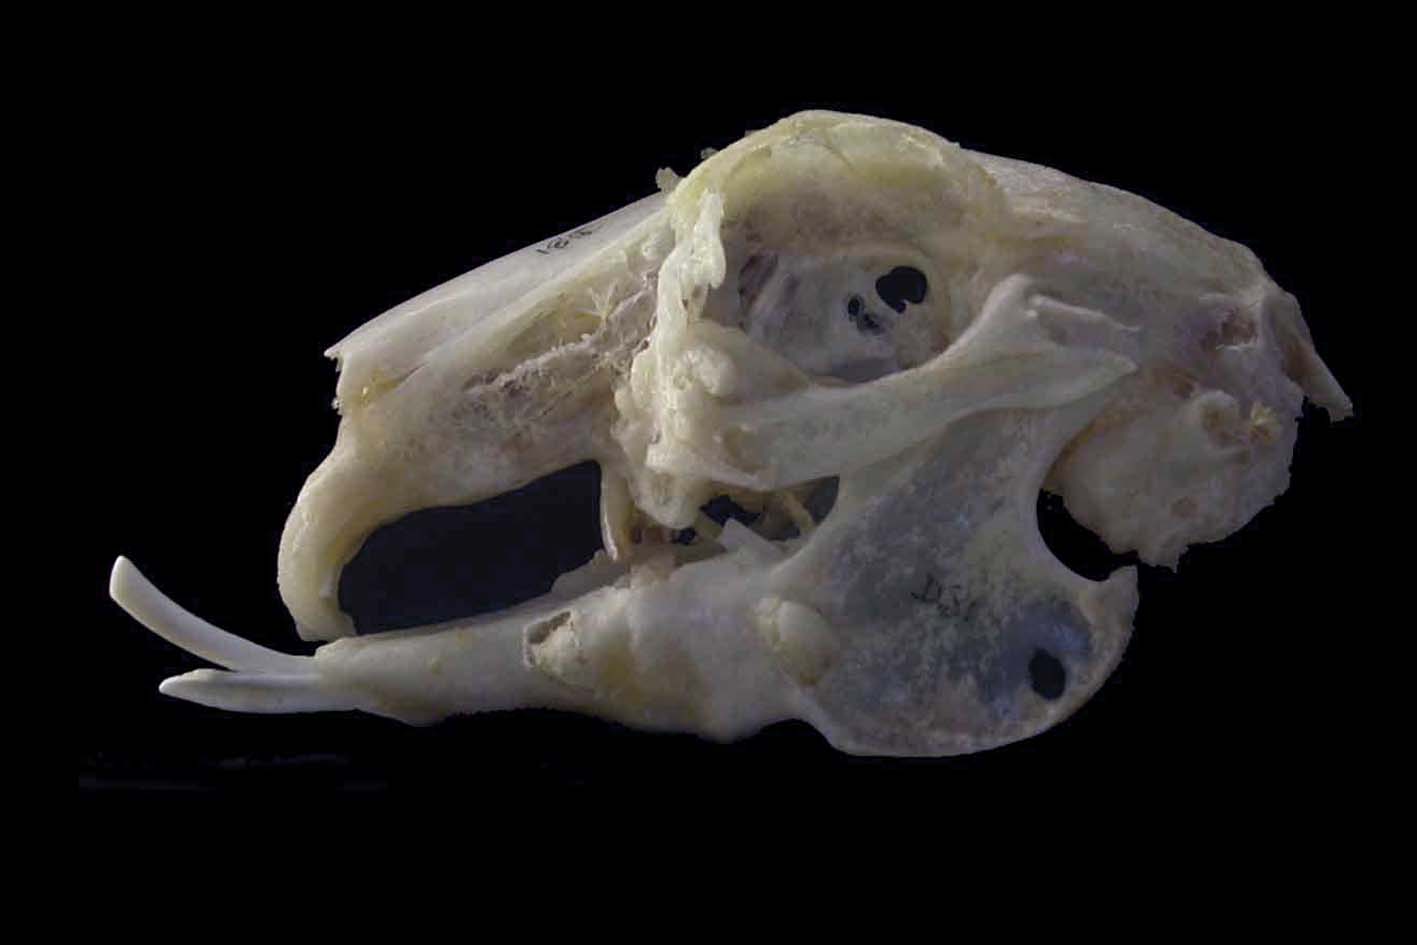 Skull of a rabbit with advanced dental disease